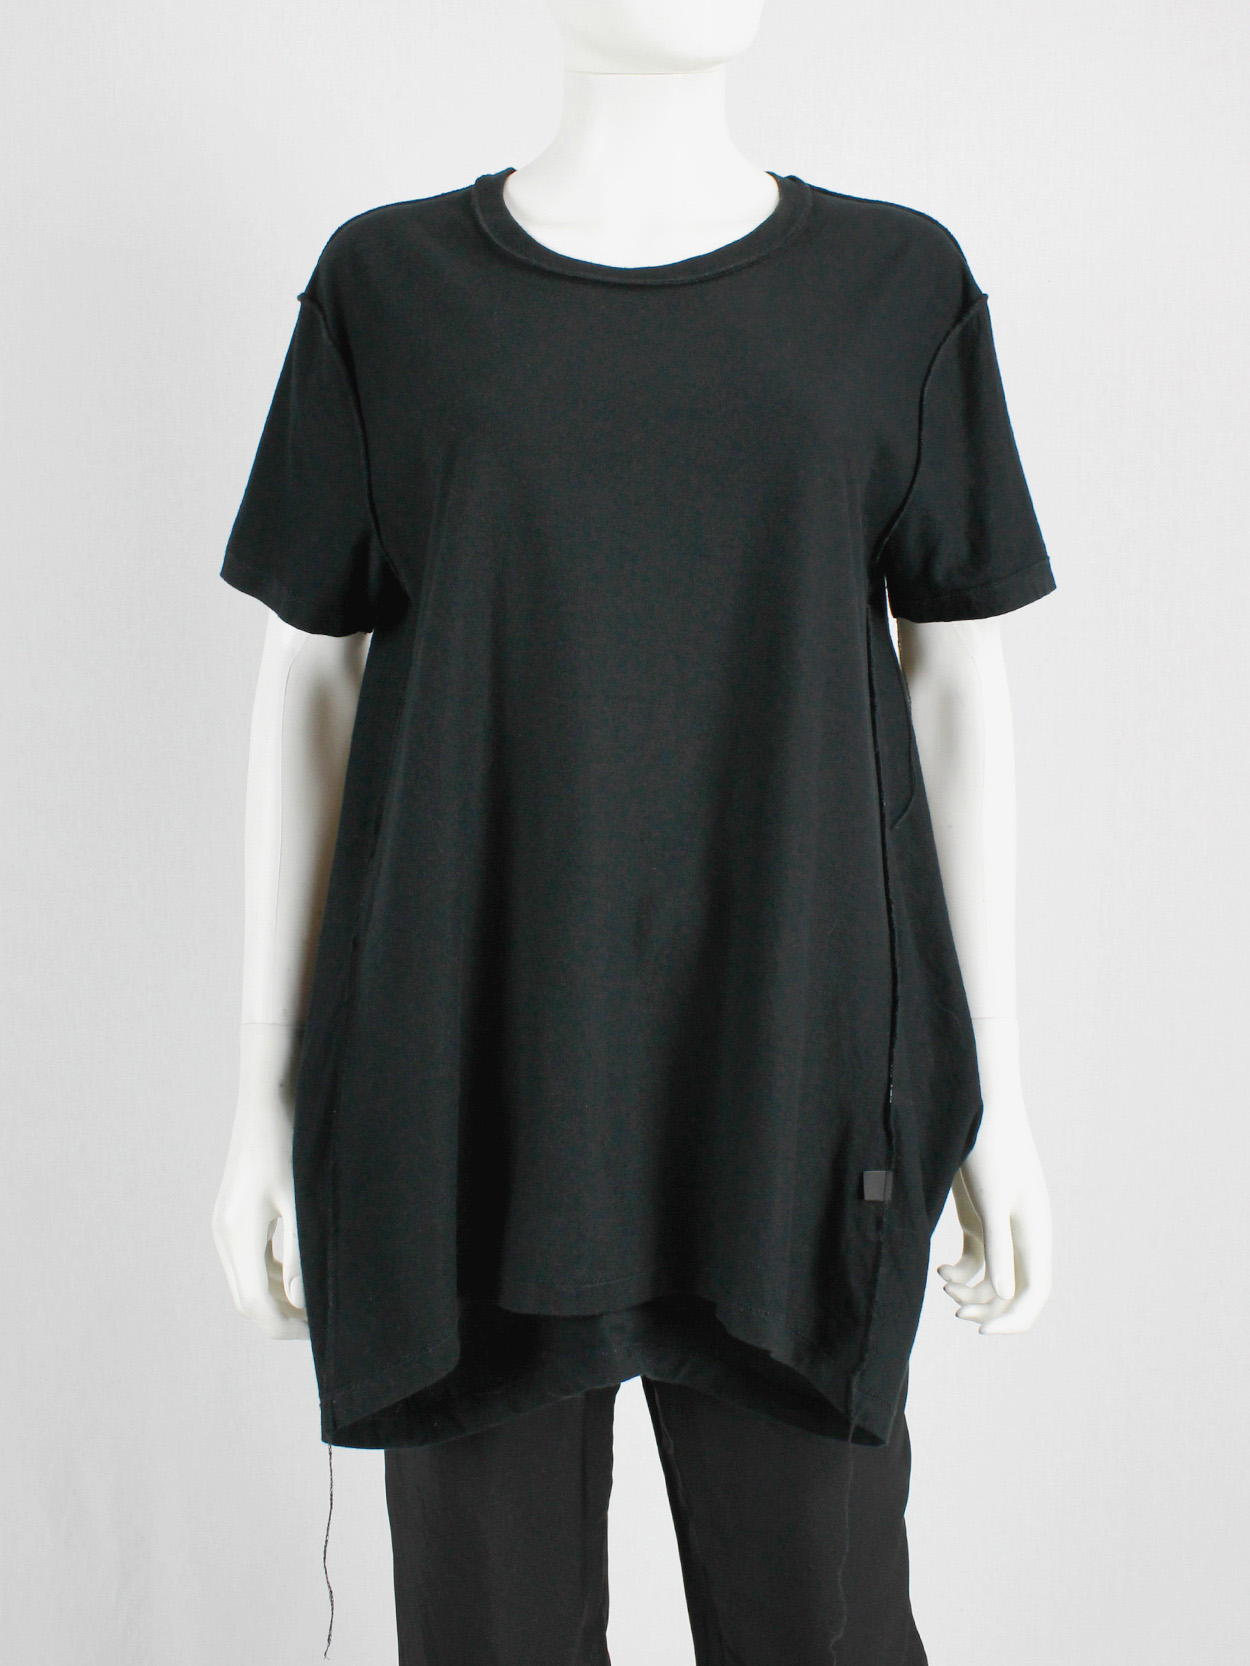 Margiela black t-shirt hanging on the front of the body spring 2003 (5)